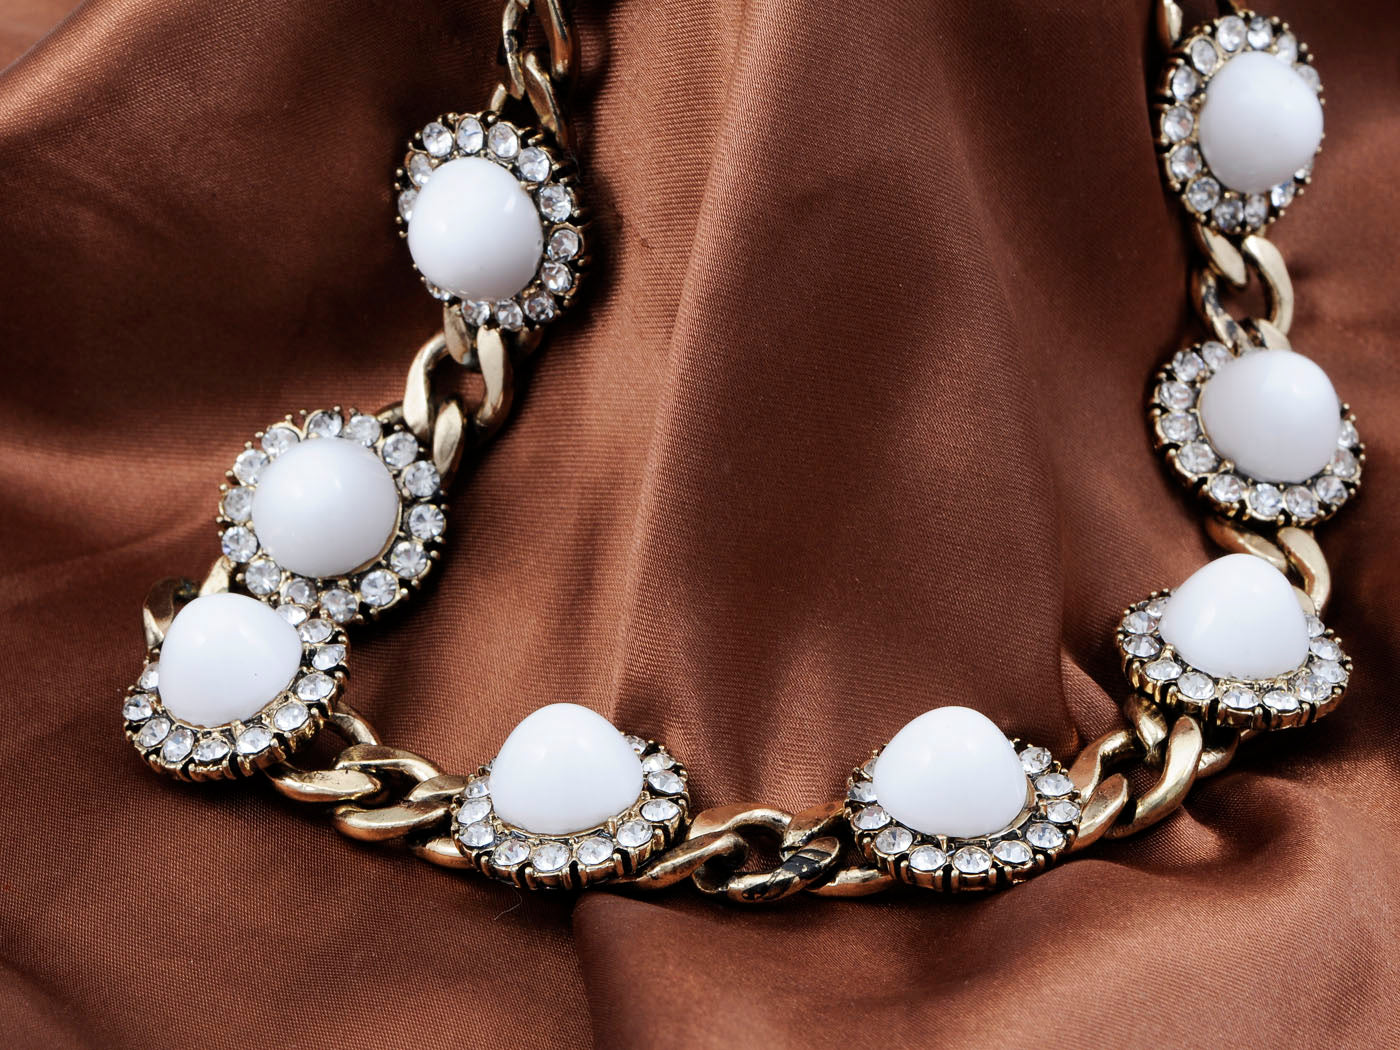 Ethnic White Bead Accented Collar Necklace